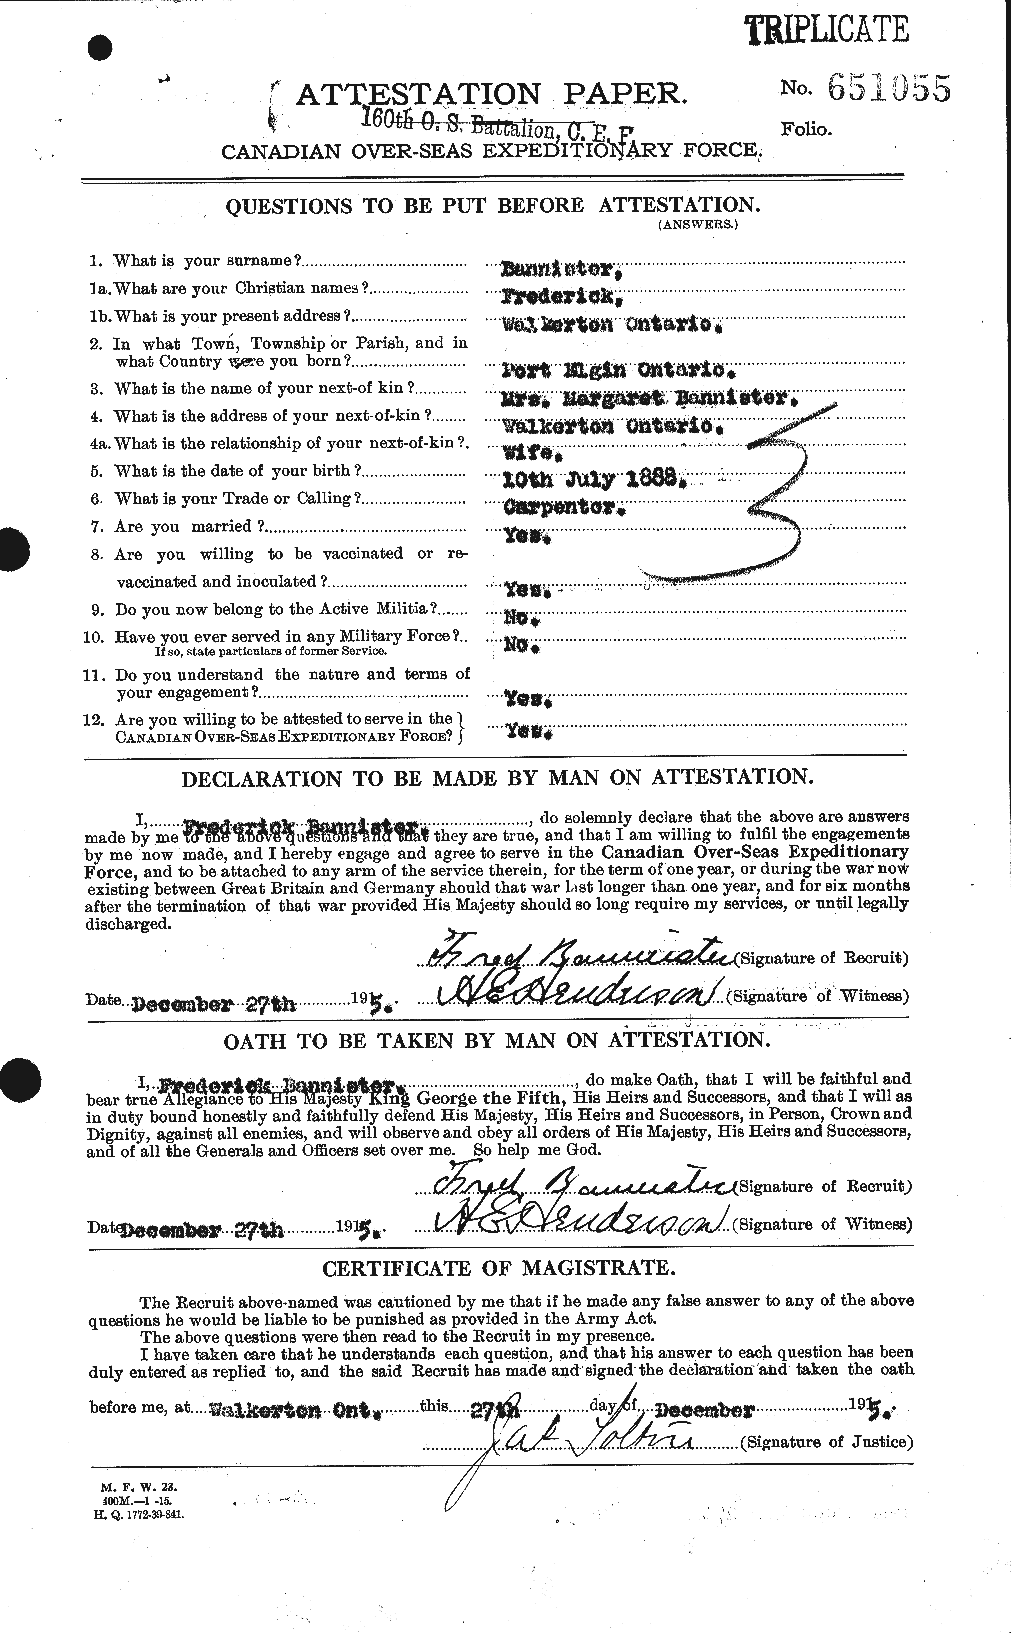 Personnel Records of the First World War - CEF 224802a